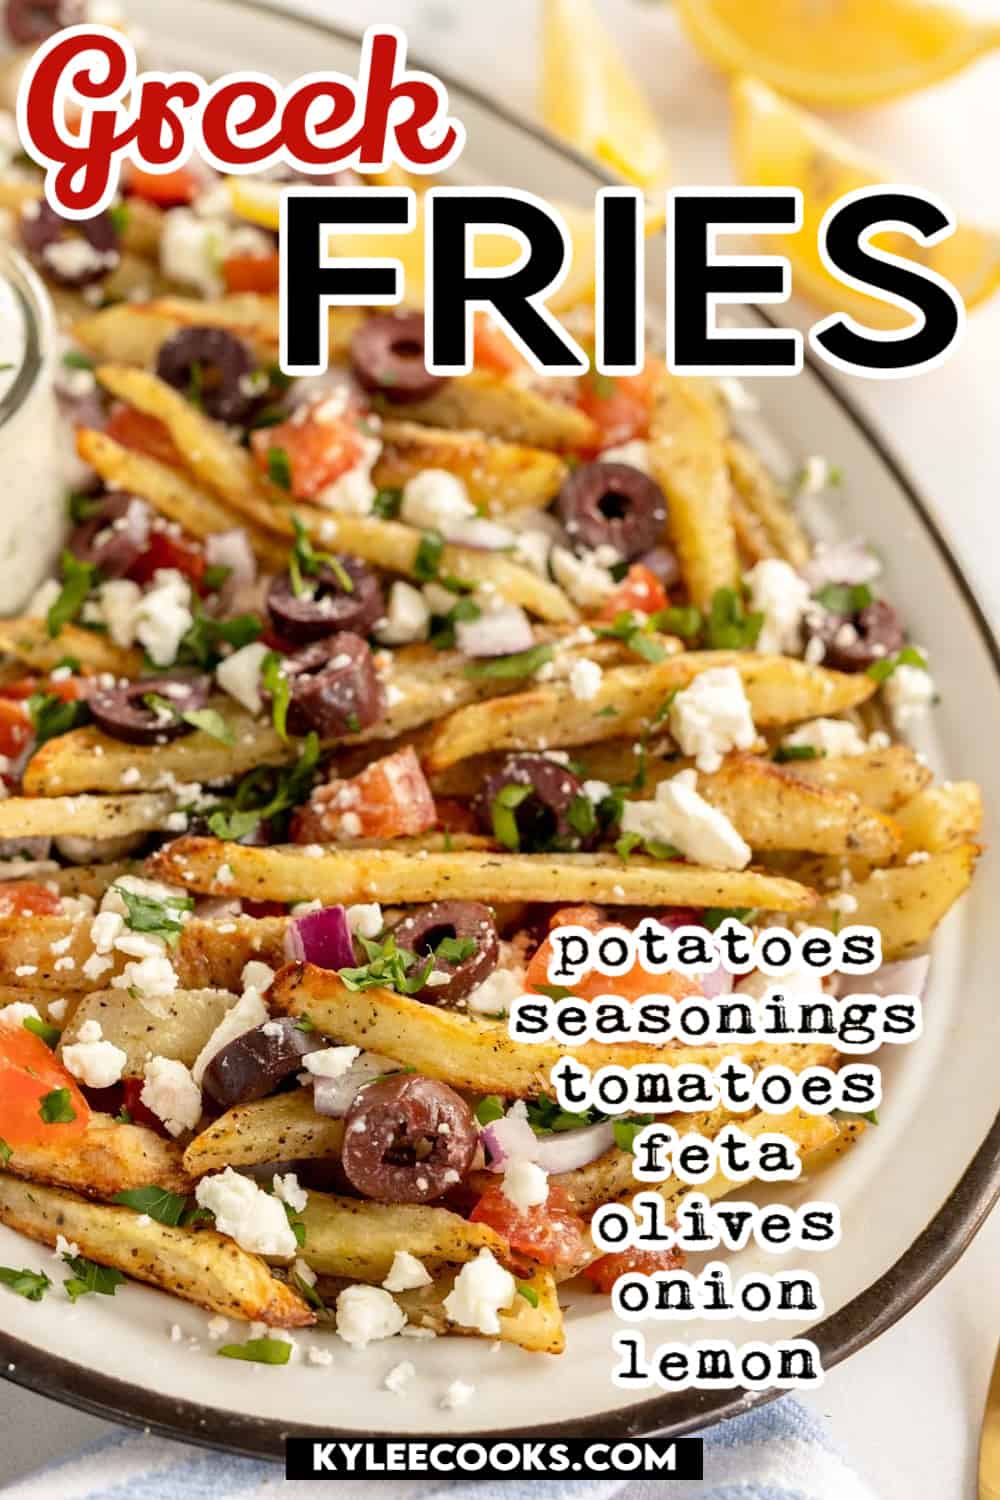 greek fries on a platter with recipe ingredients overlaid.